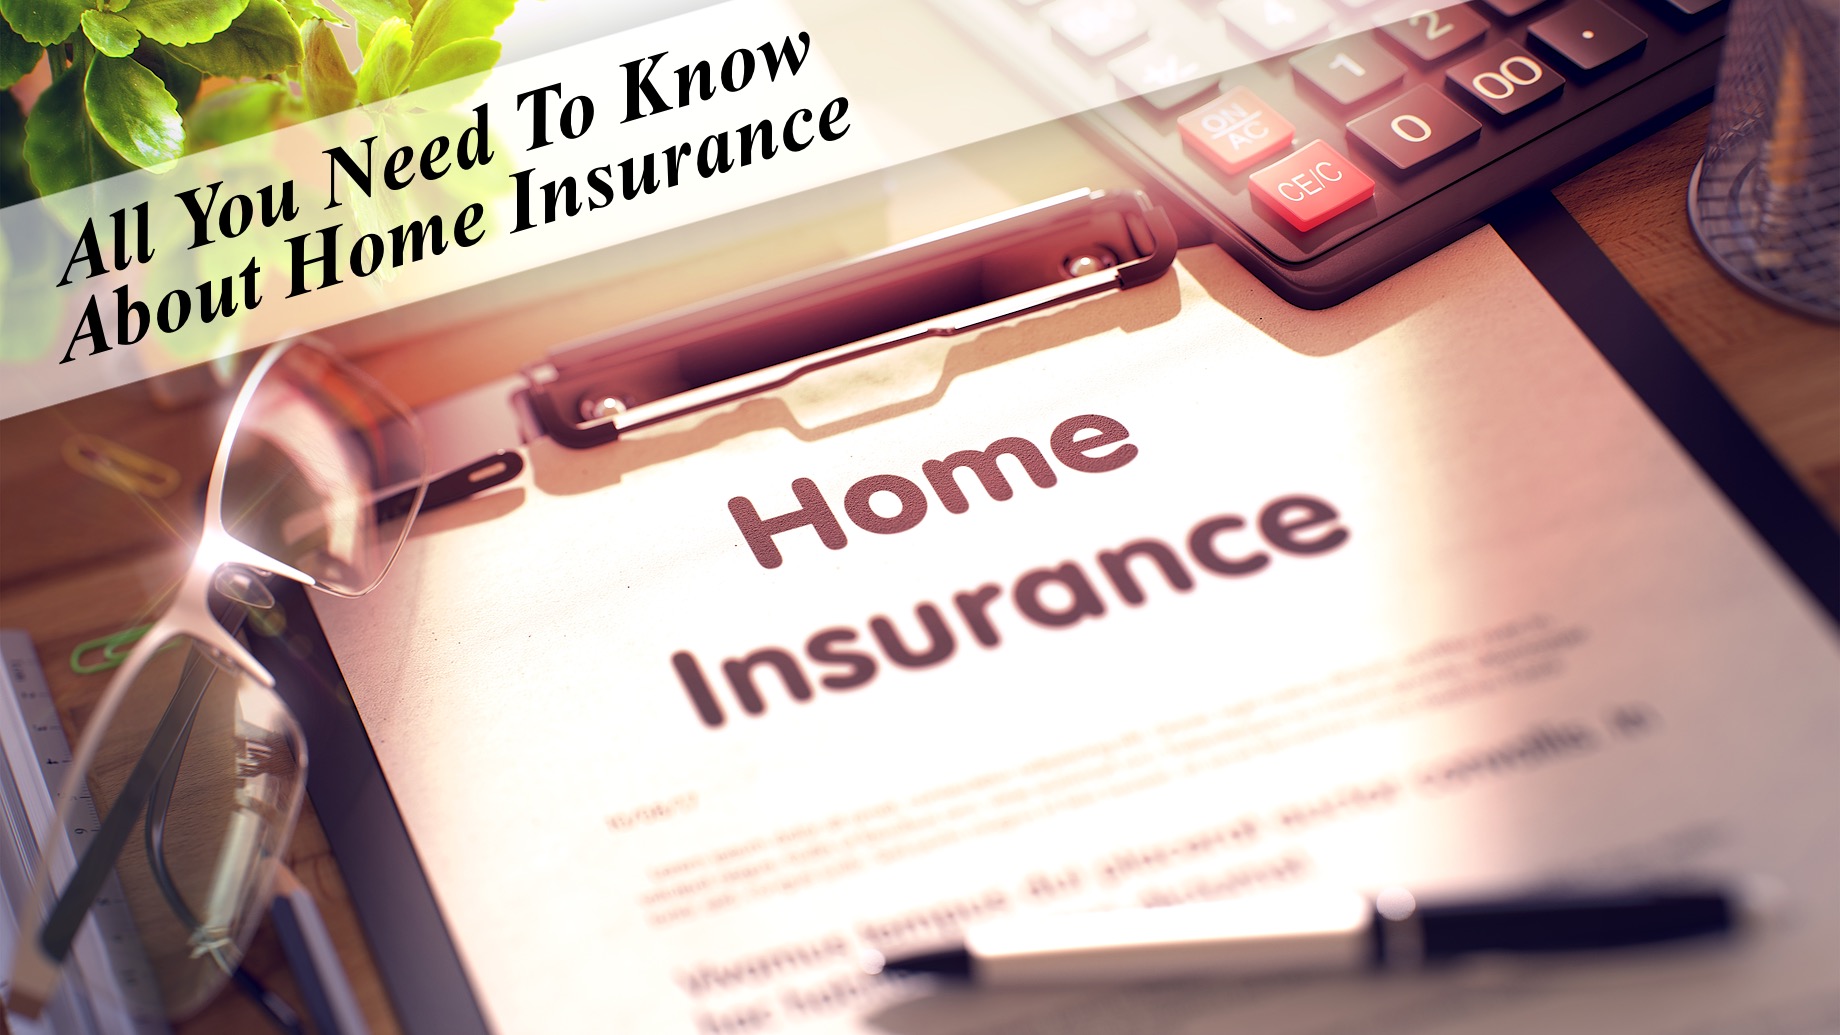 All You Need To Know About Home Insurance